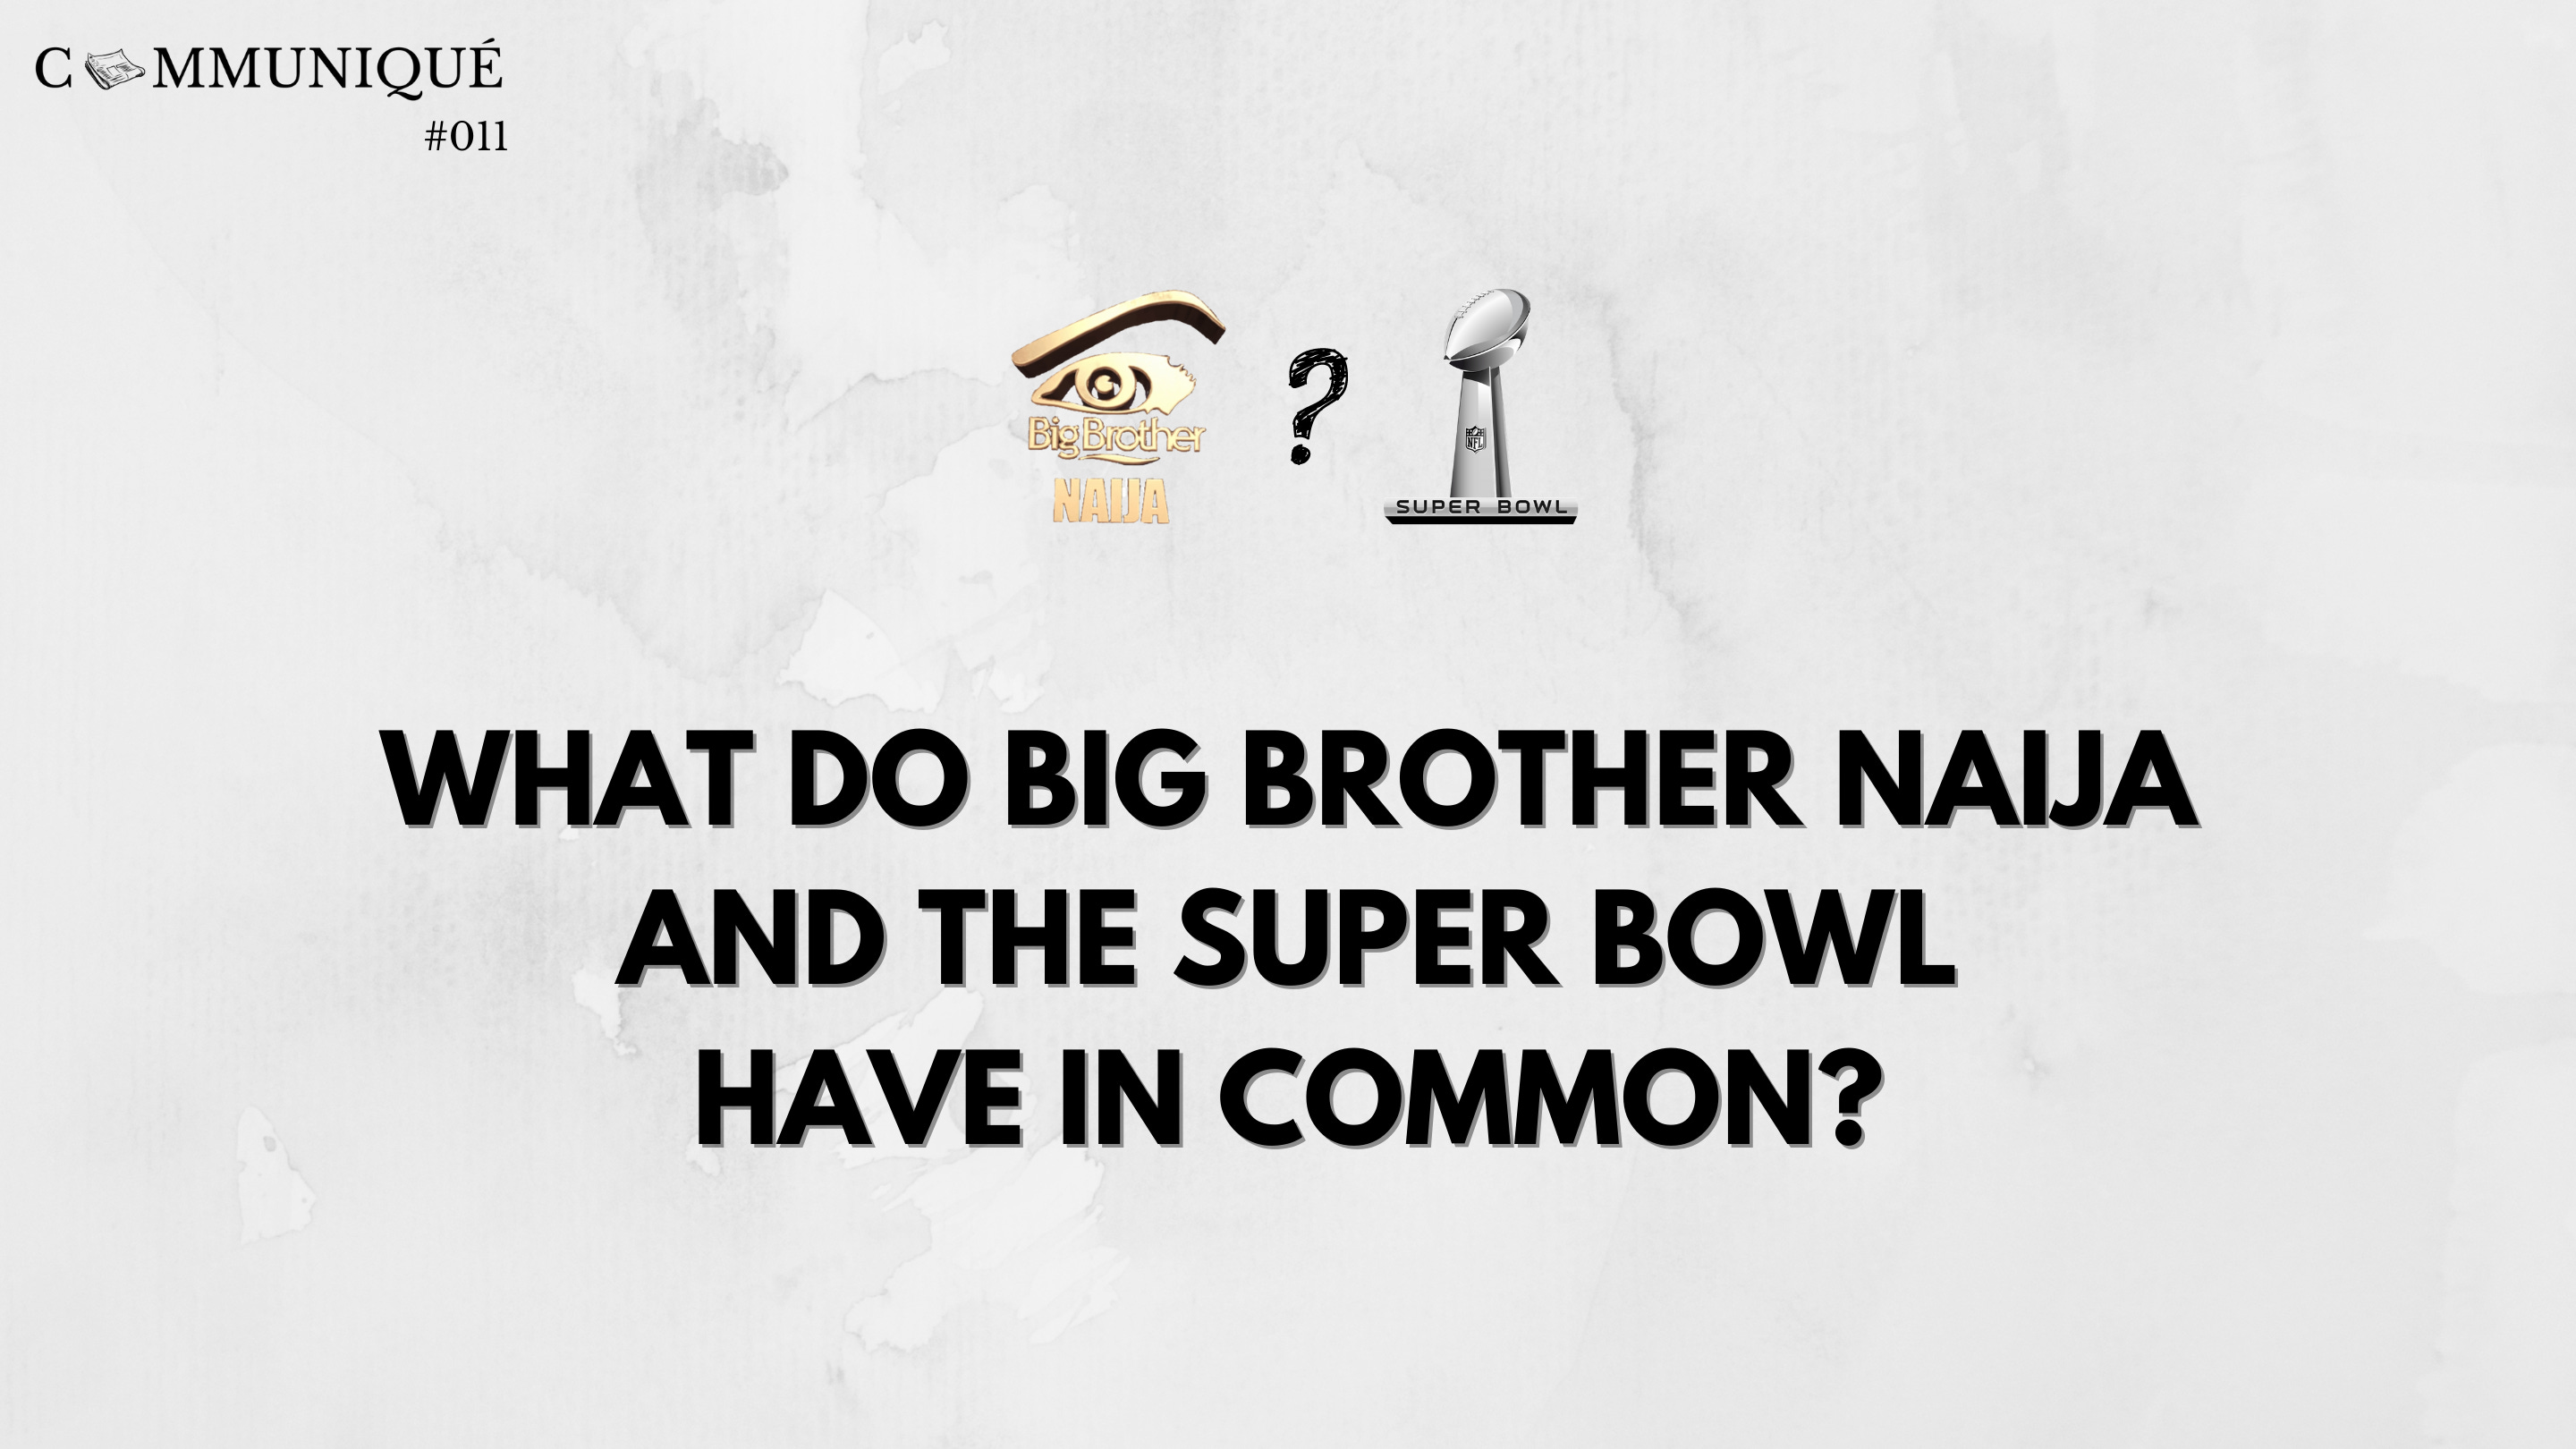 Communiqué 11: What do Big Brother Naija and the Super Bowl have in common?